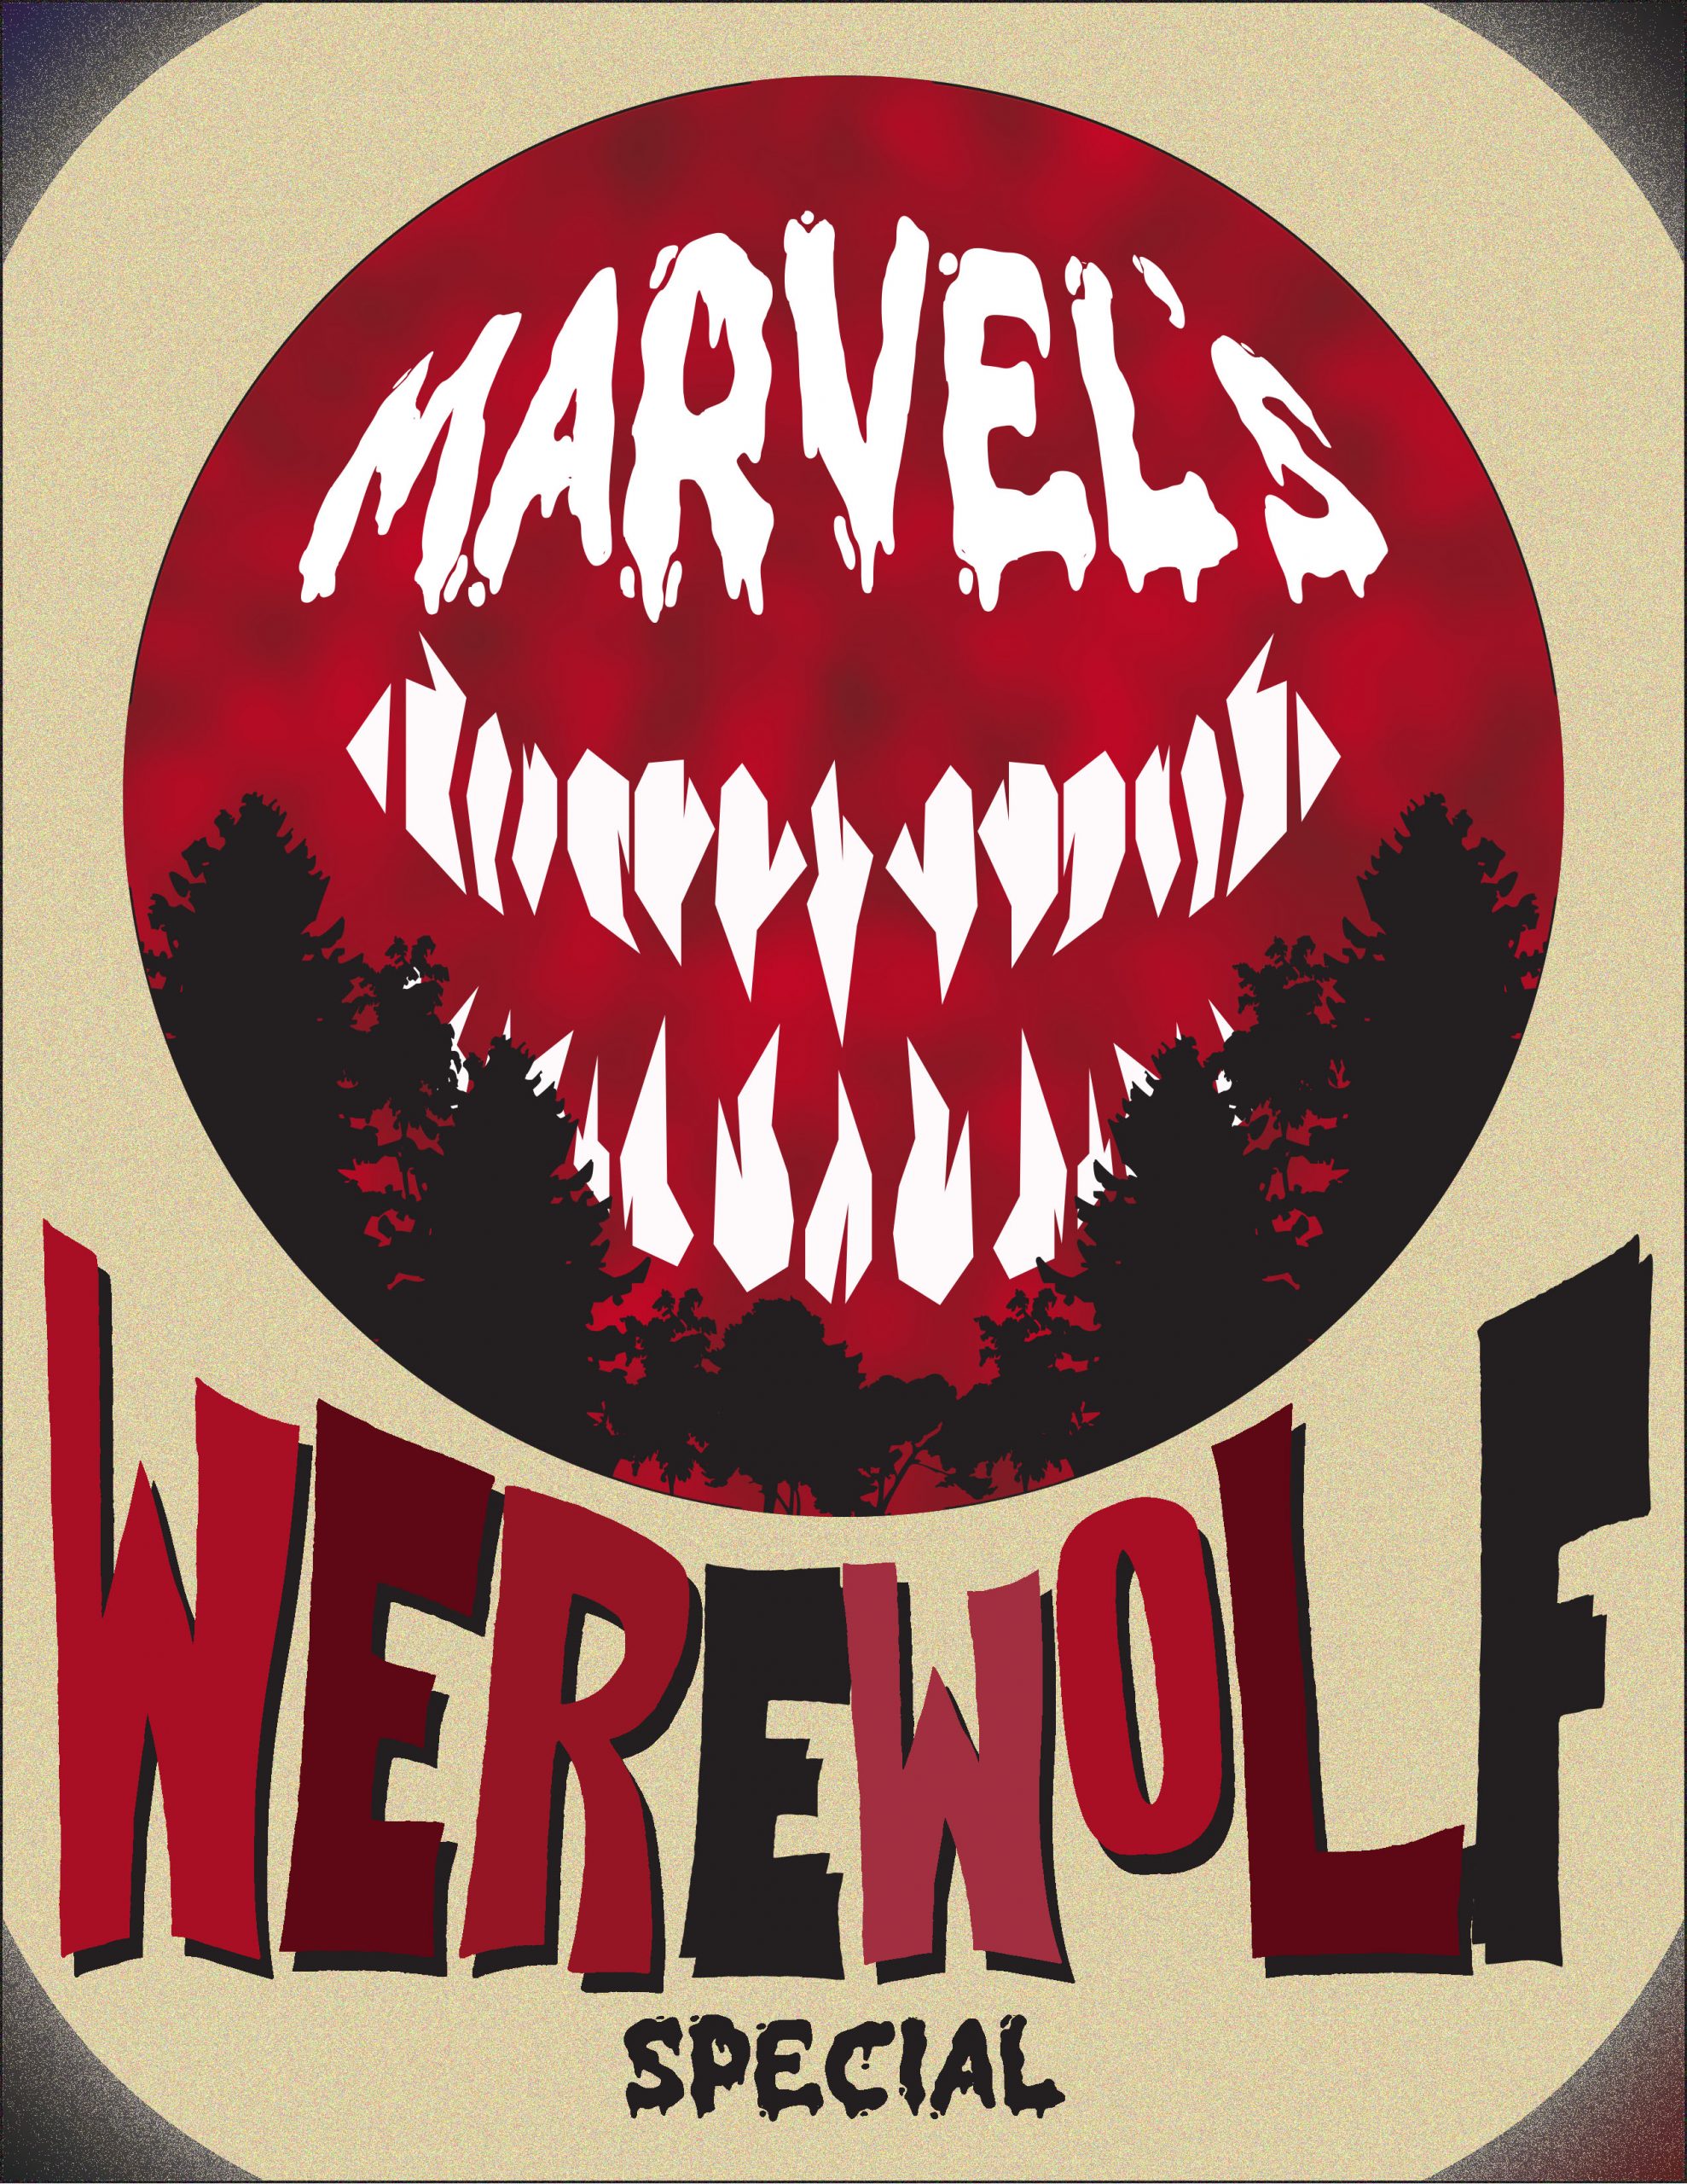 A New 'Werewolf by Night' Series Welcomes Marvel's Latest Monster